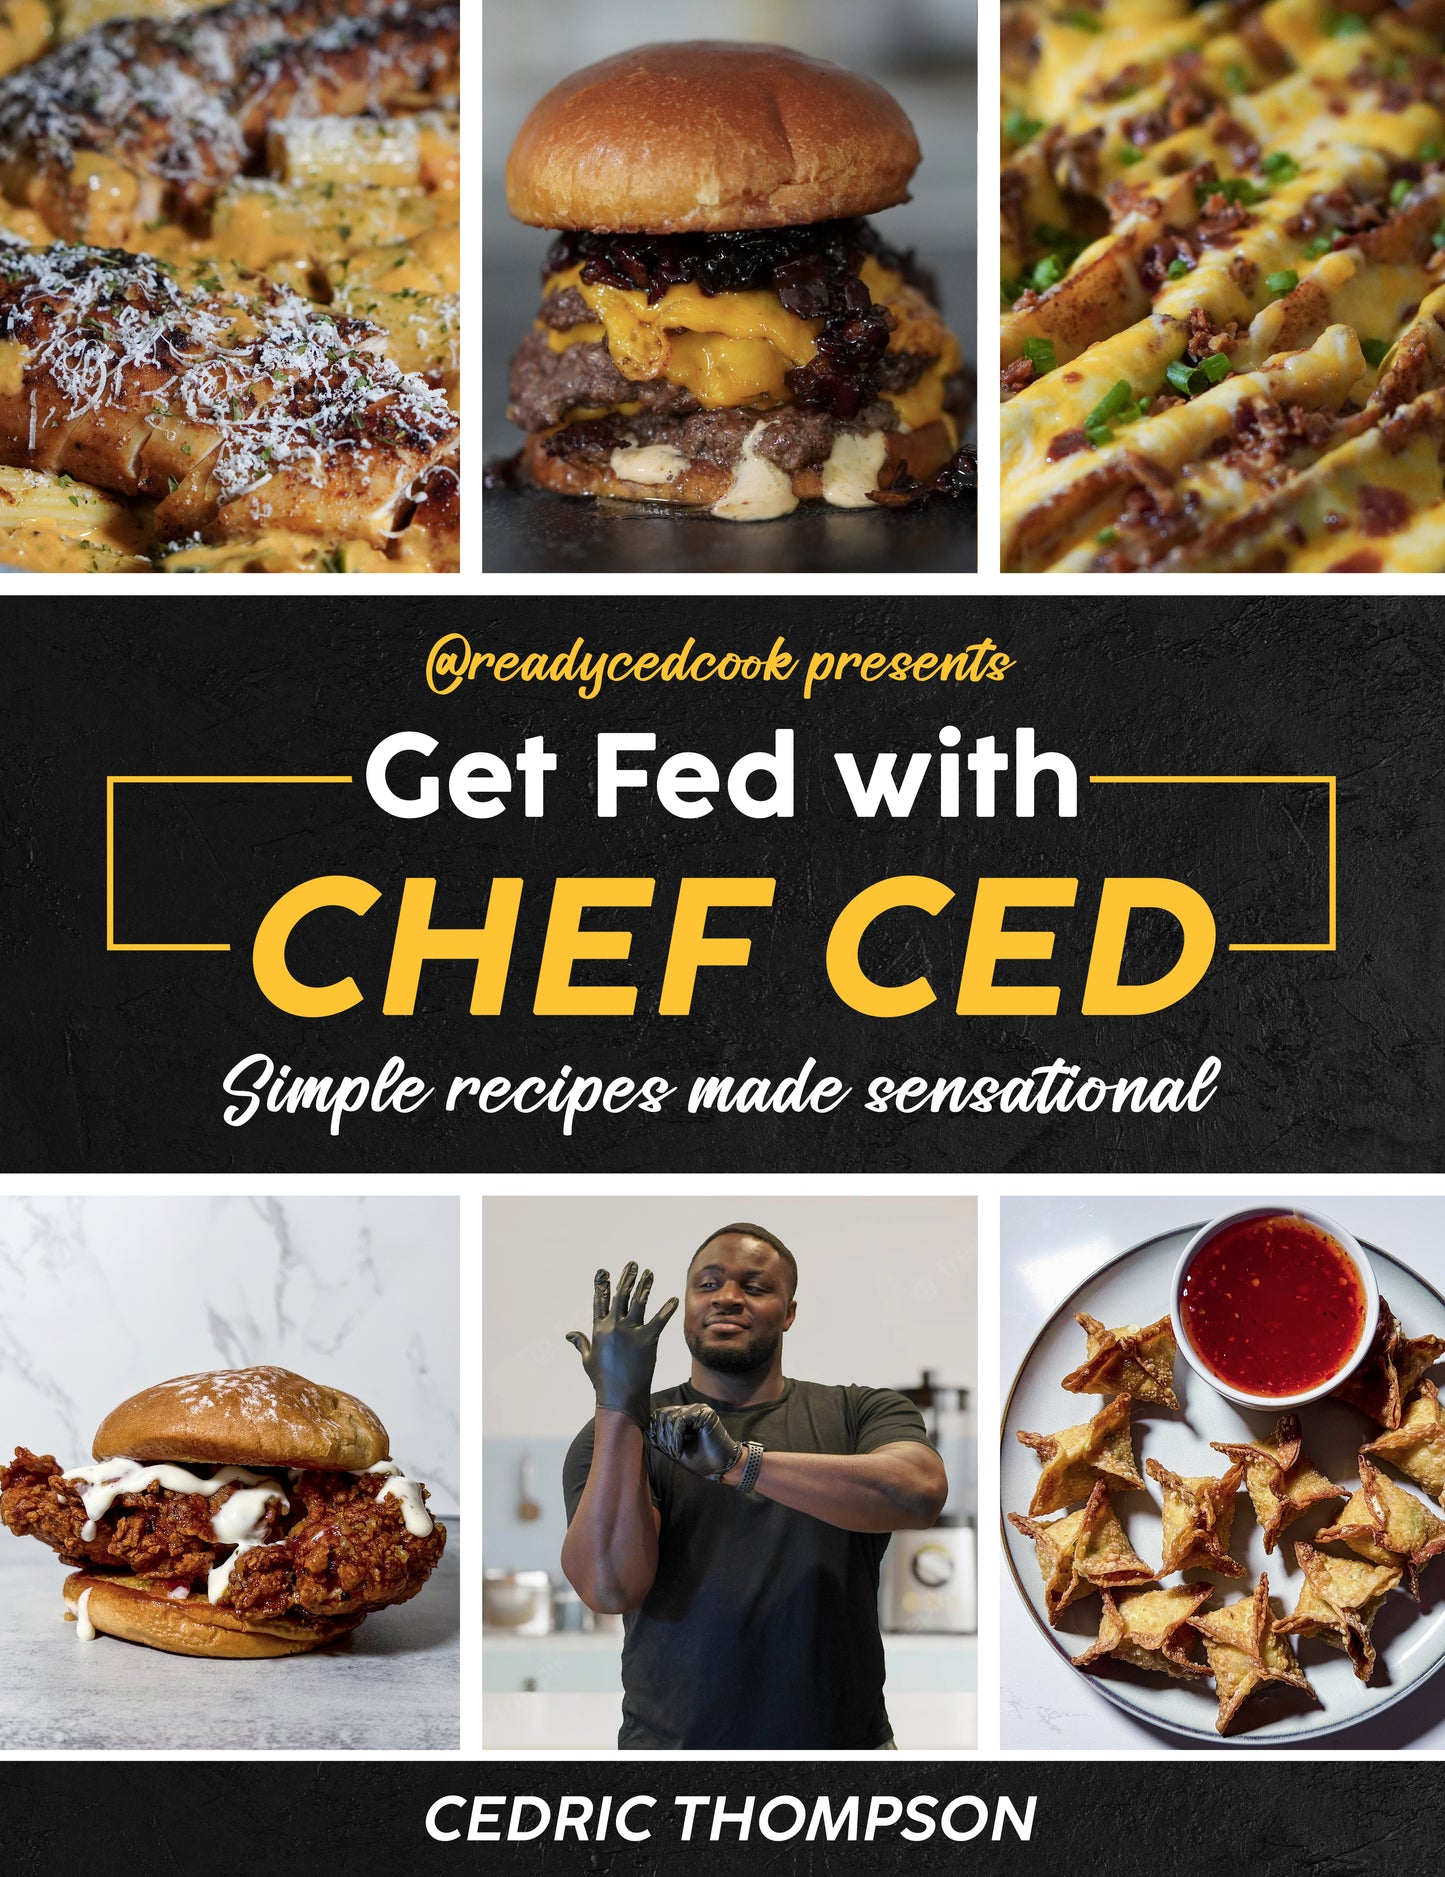 Hardcover Cookbook - Get Fed with Chef Ced